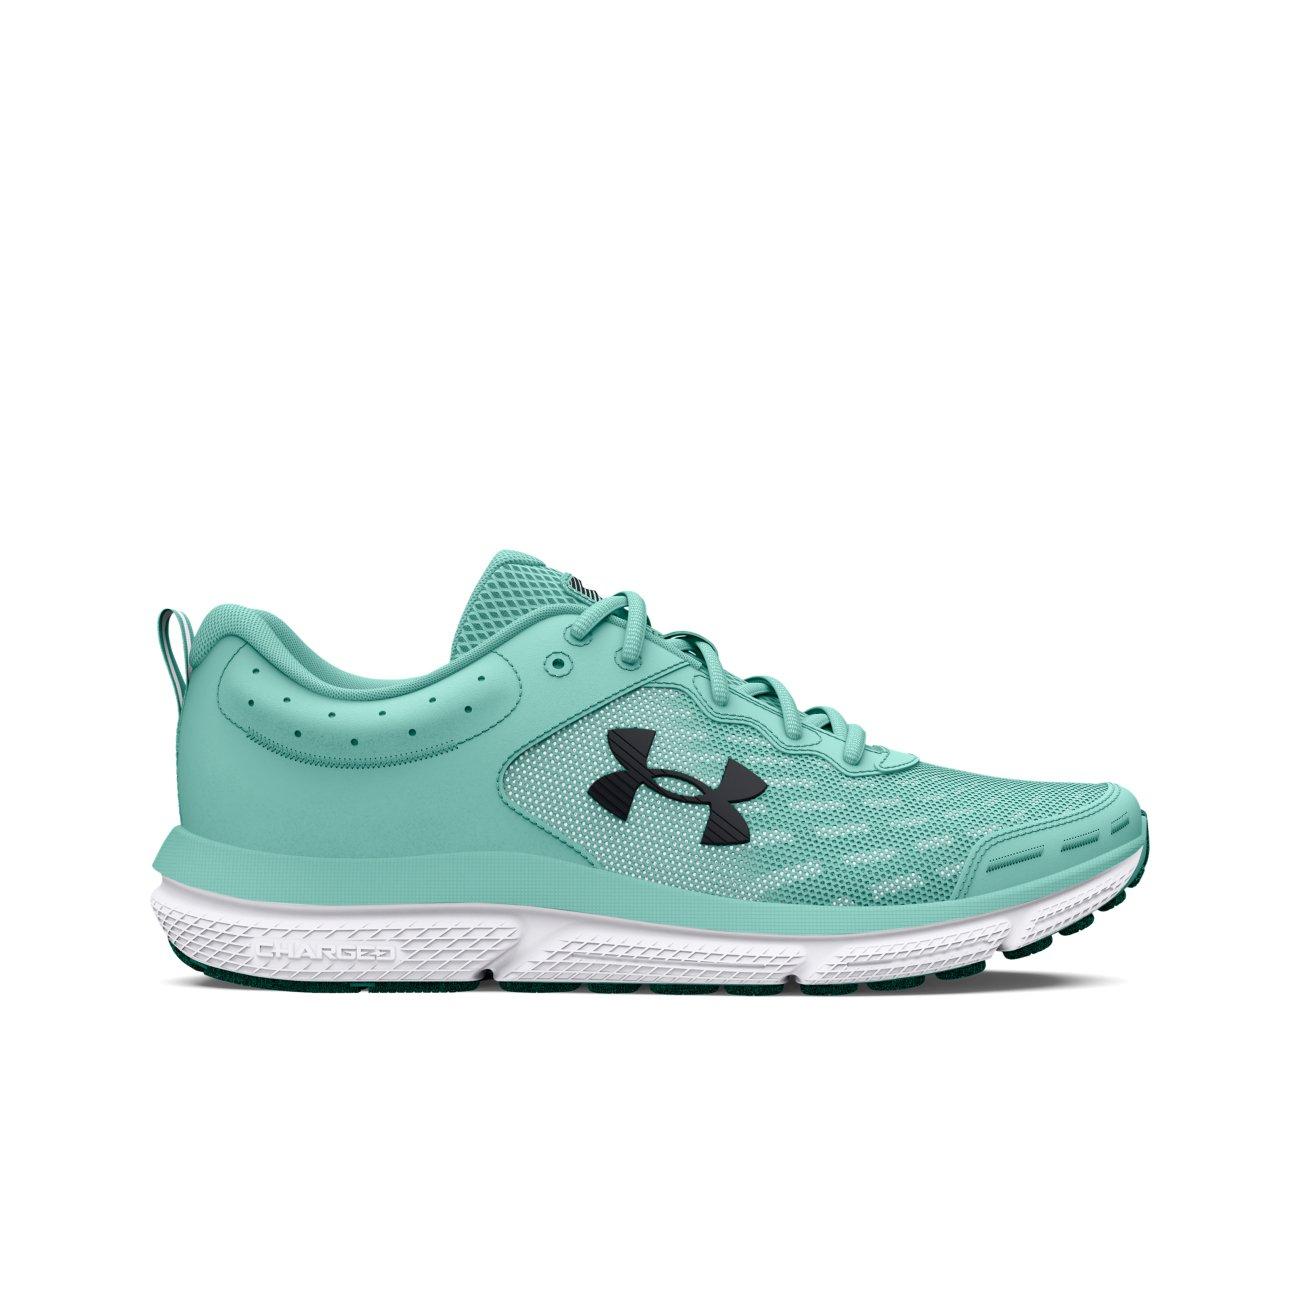 Under Armour Charged Assert 10 Neo Turquoise/Black Women's Running Shoe